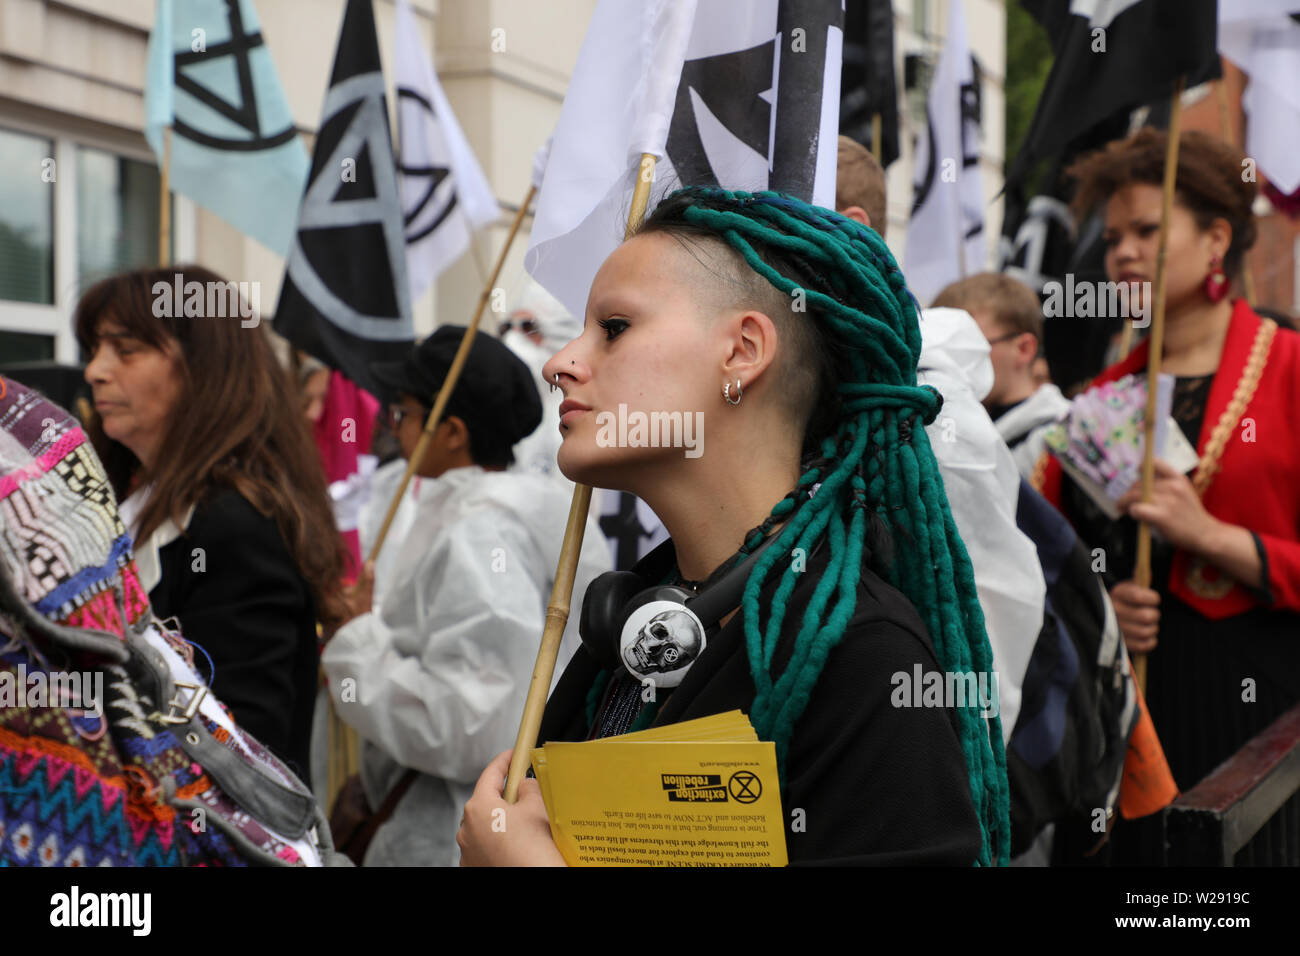 London, UK. 2nd July 2019. Extinction Rebellion Arts and Culture Group creating a silent procession to and theatre in front of several fossil fuel companies. The protest play is based on Bizet's opera Carmen, with real life actors and an opera singer. Pictured: one of the actors and participants of the procession. Credit: Joe Kuis / Alamy News Stock Photo